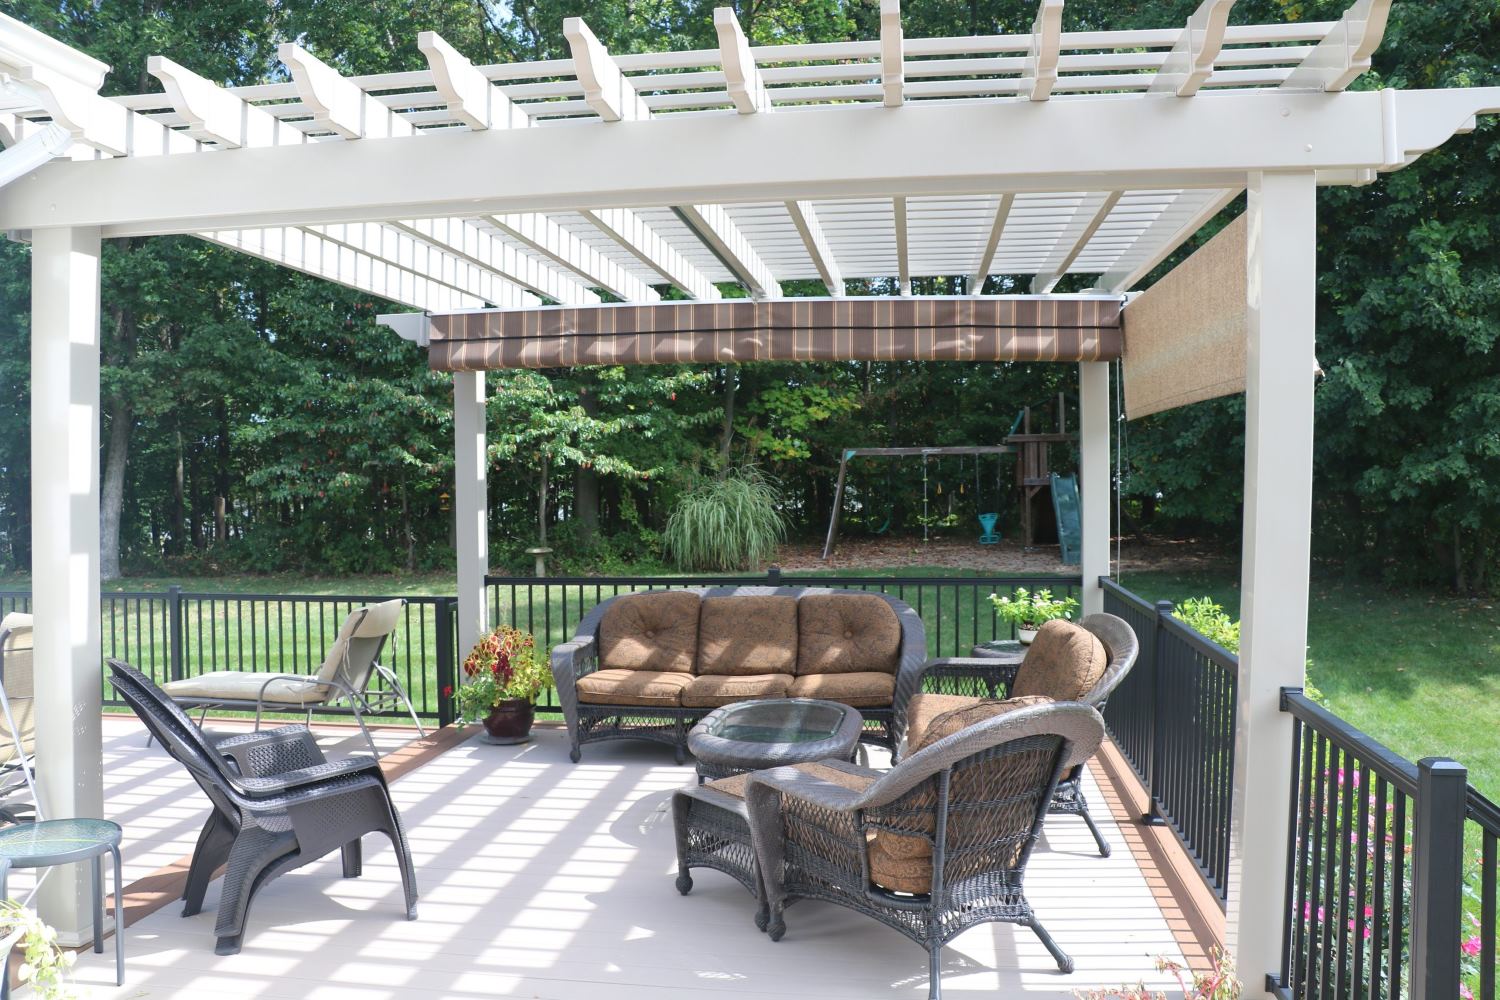 How To Add A Pergola To An Existing Deck